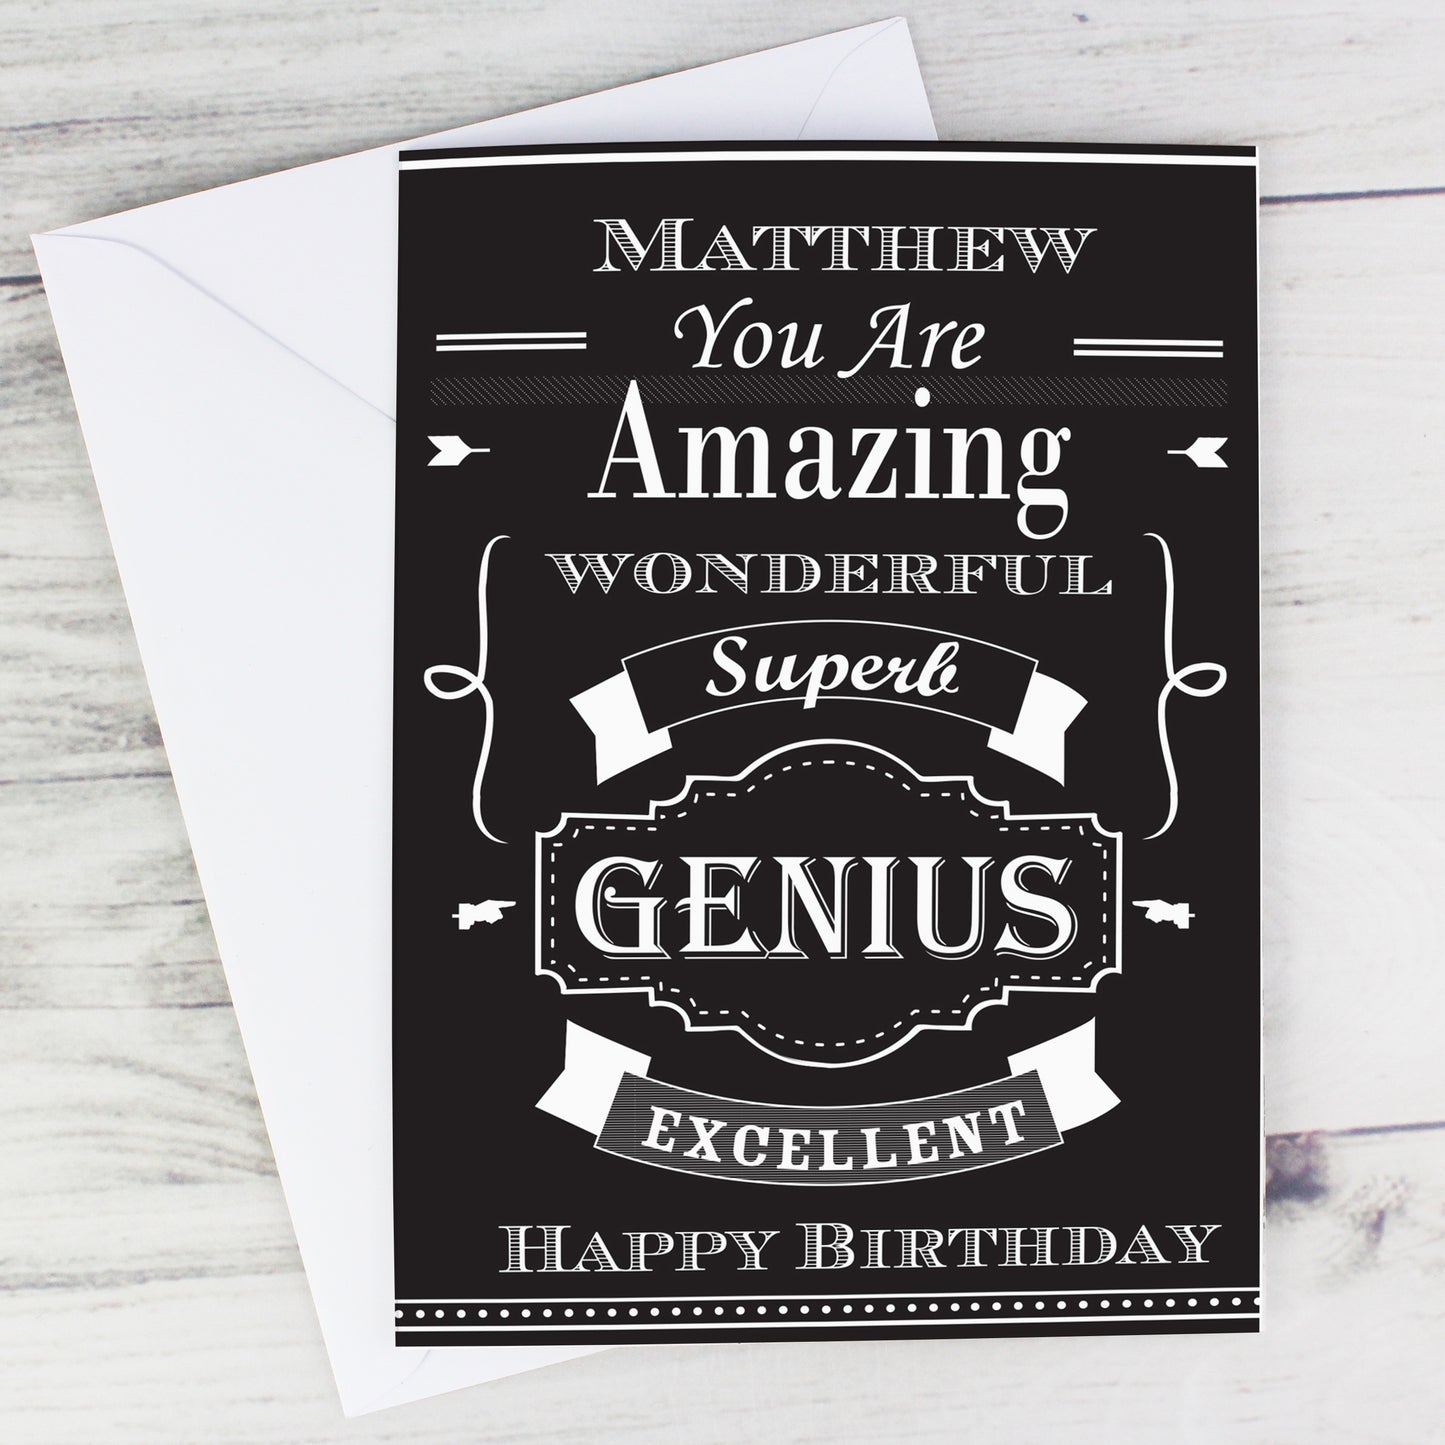 Personalised Vintage Typography Card Add Any Name - Personalise It!